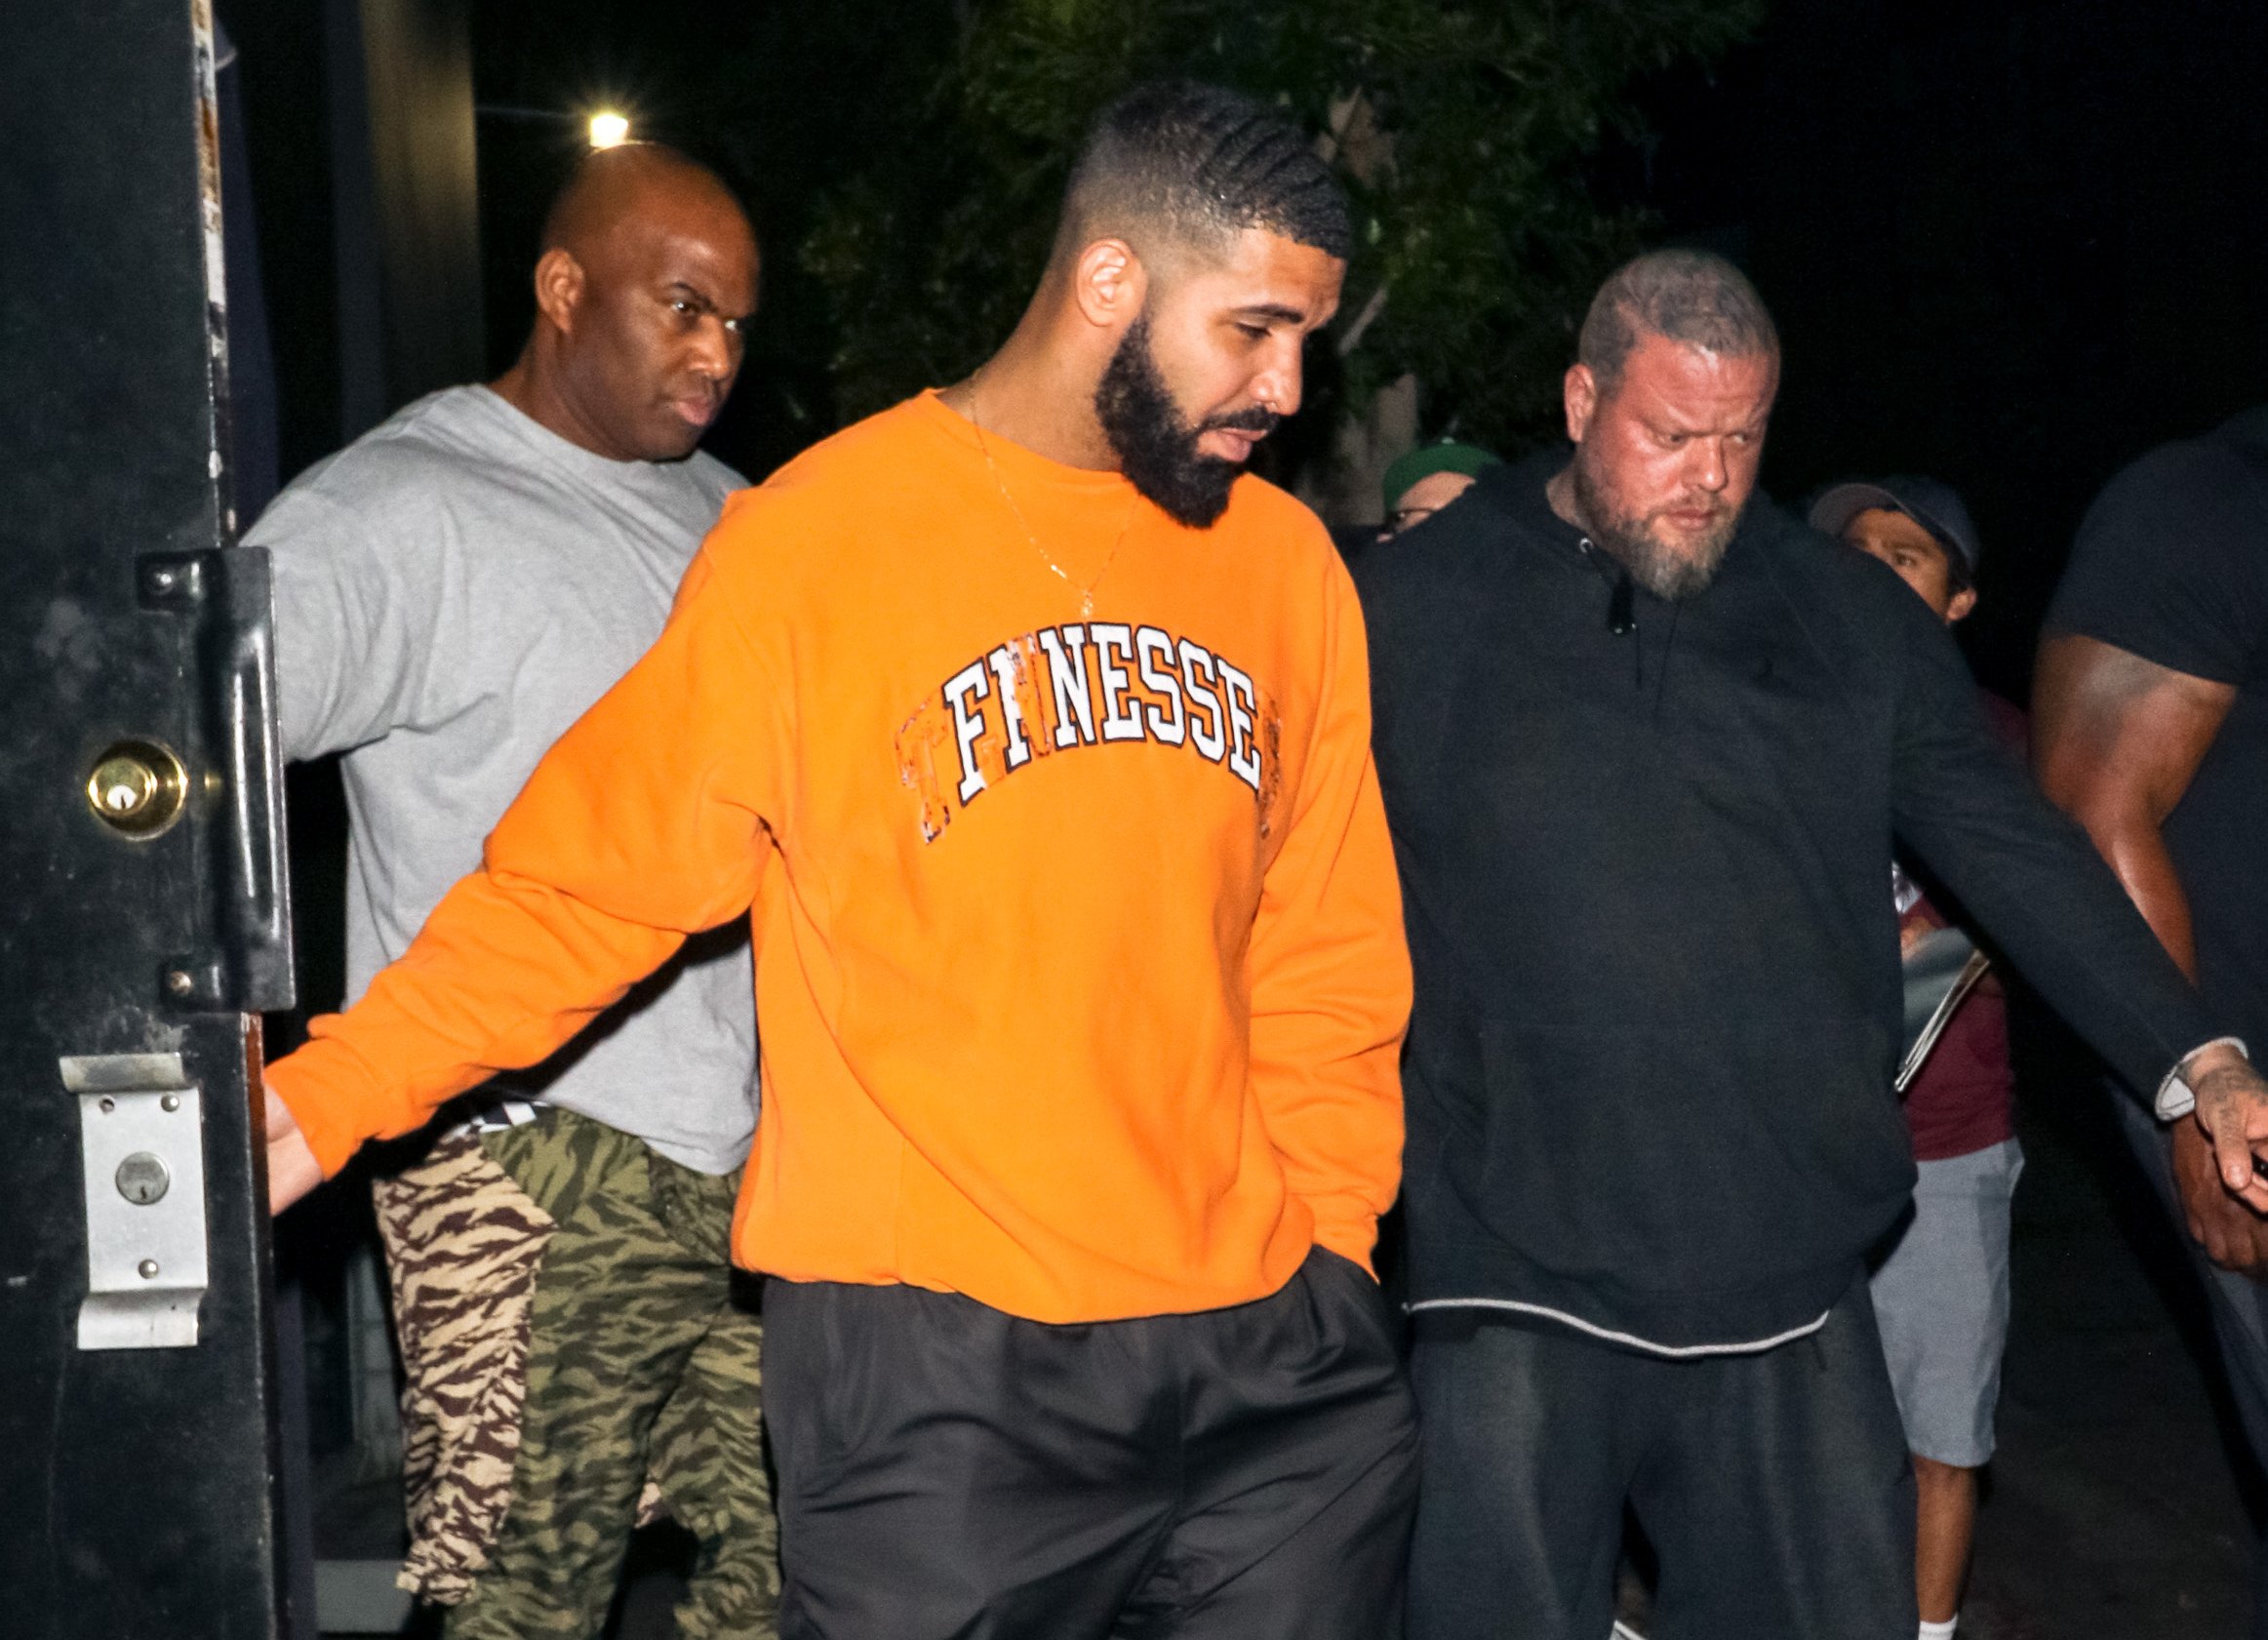 LOS ANGELES, CA - JULY 17: Drake is seen on July 17, 2018 in Los Angeles, California.  (Photo by gotpap/Bauer-Griffin/GC Images)